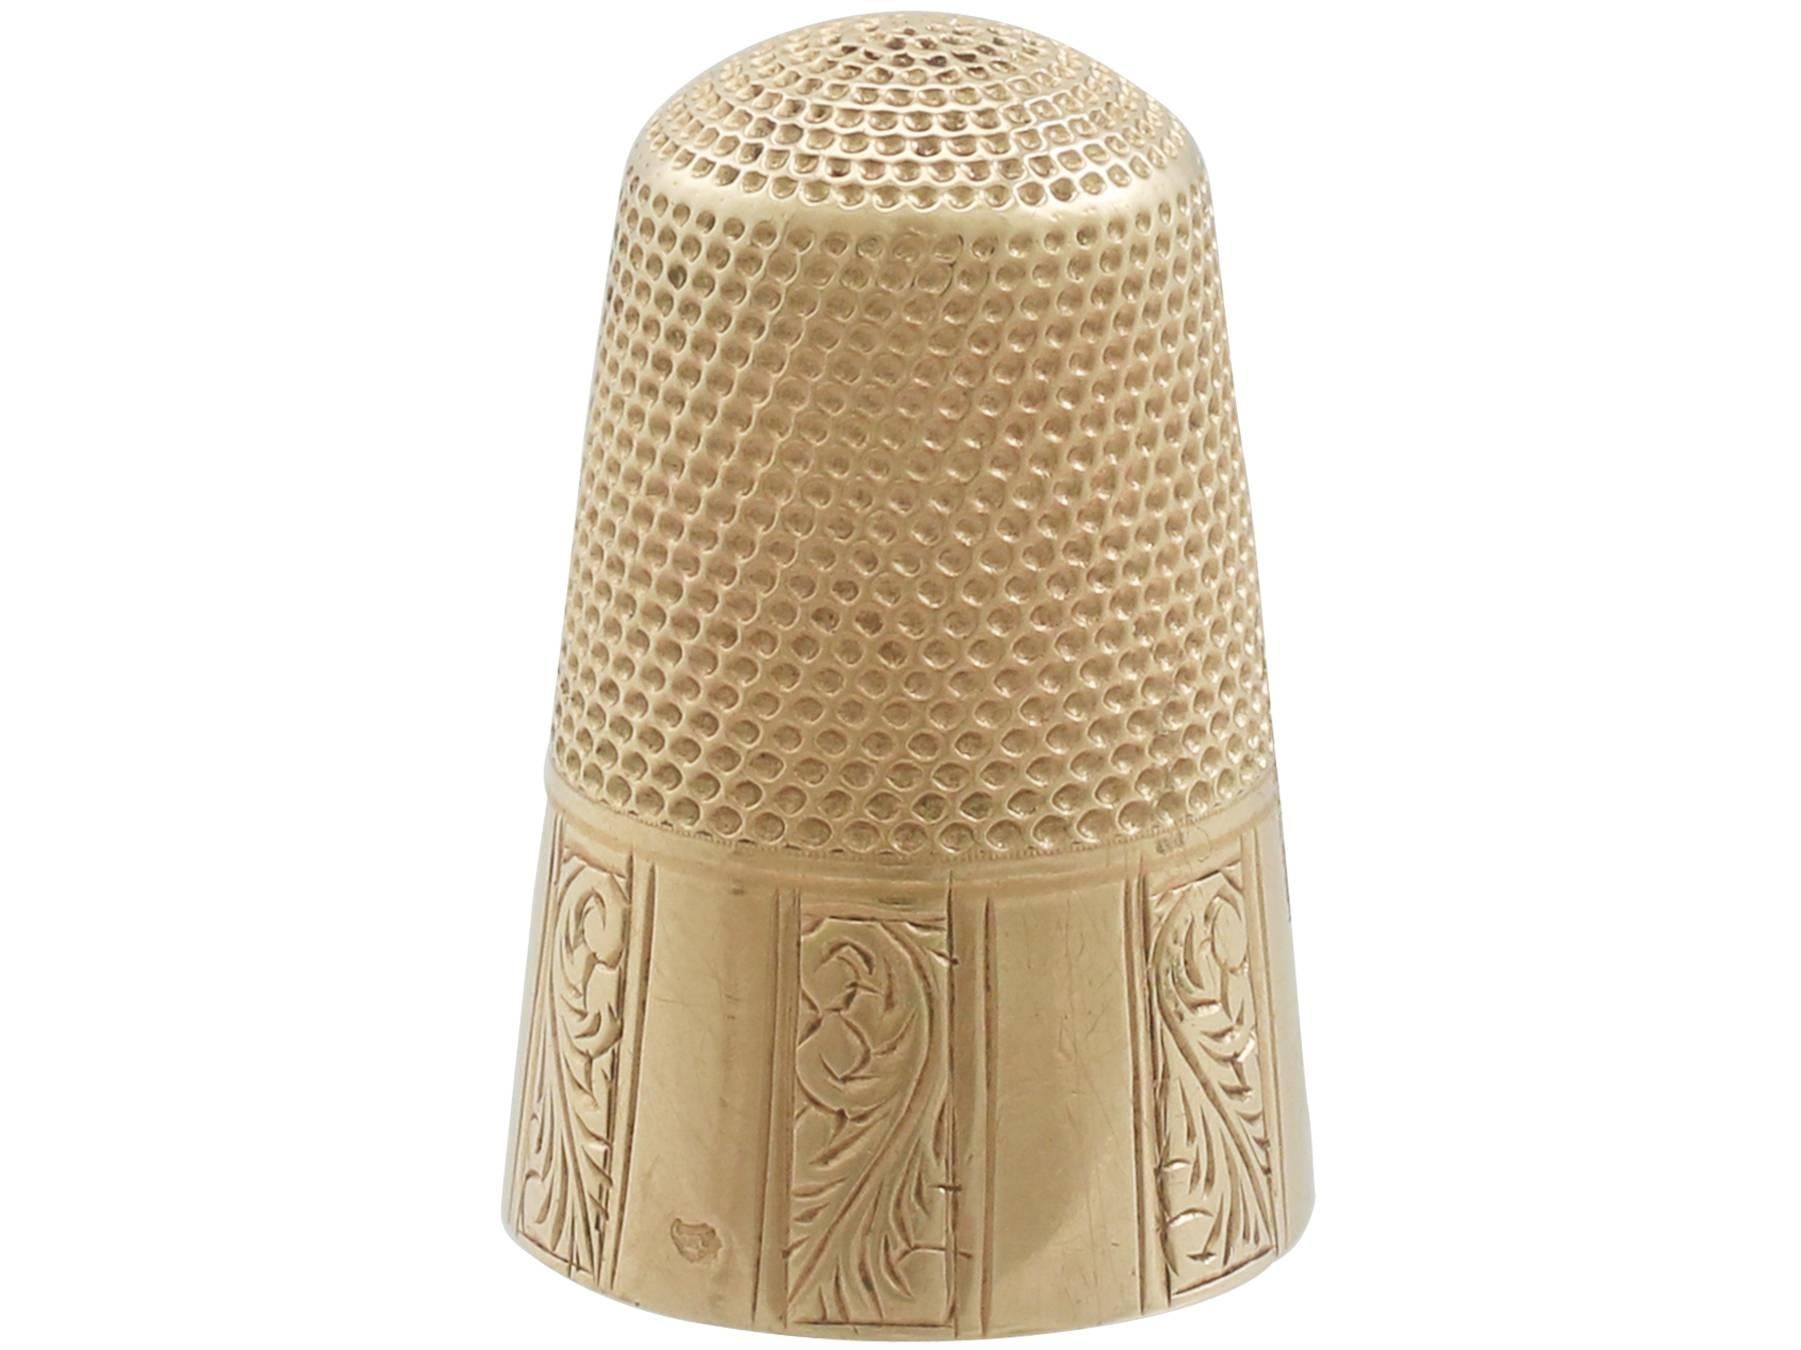 An exceptional, fine and impressive antique French 18 karat yellow gold thimble; an addition to our diverse range of collectable antiques.

This exceptional antique French 18 karat yellow gold thimble has a cylindrical tapering shaped form.

The